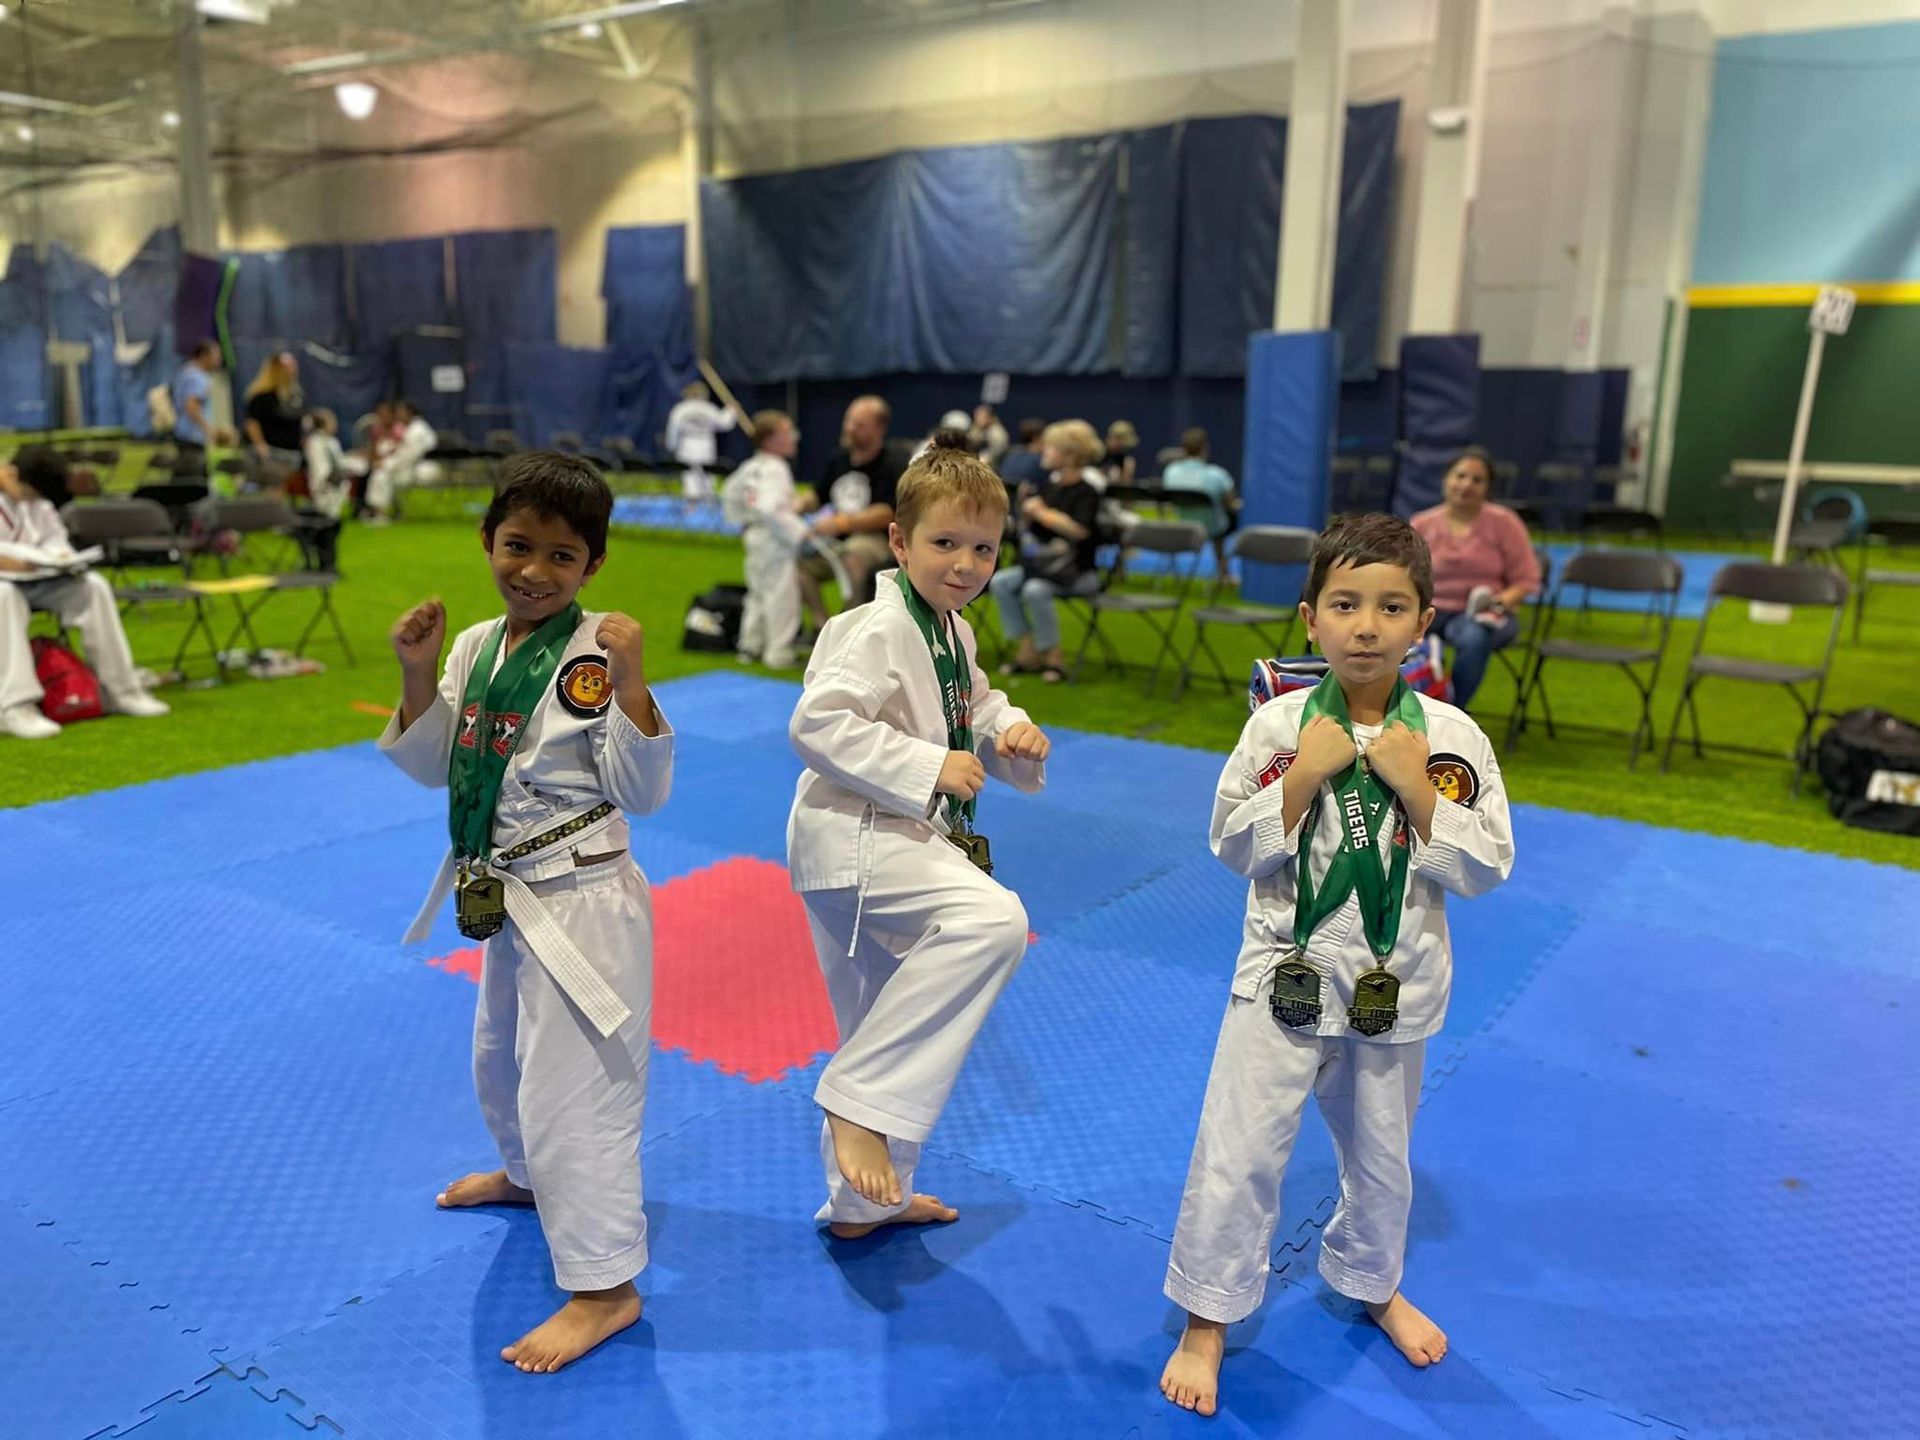 Three young boys are standing on a karate mat in a gym with medals around their necks.